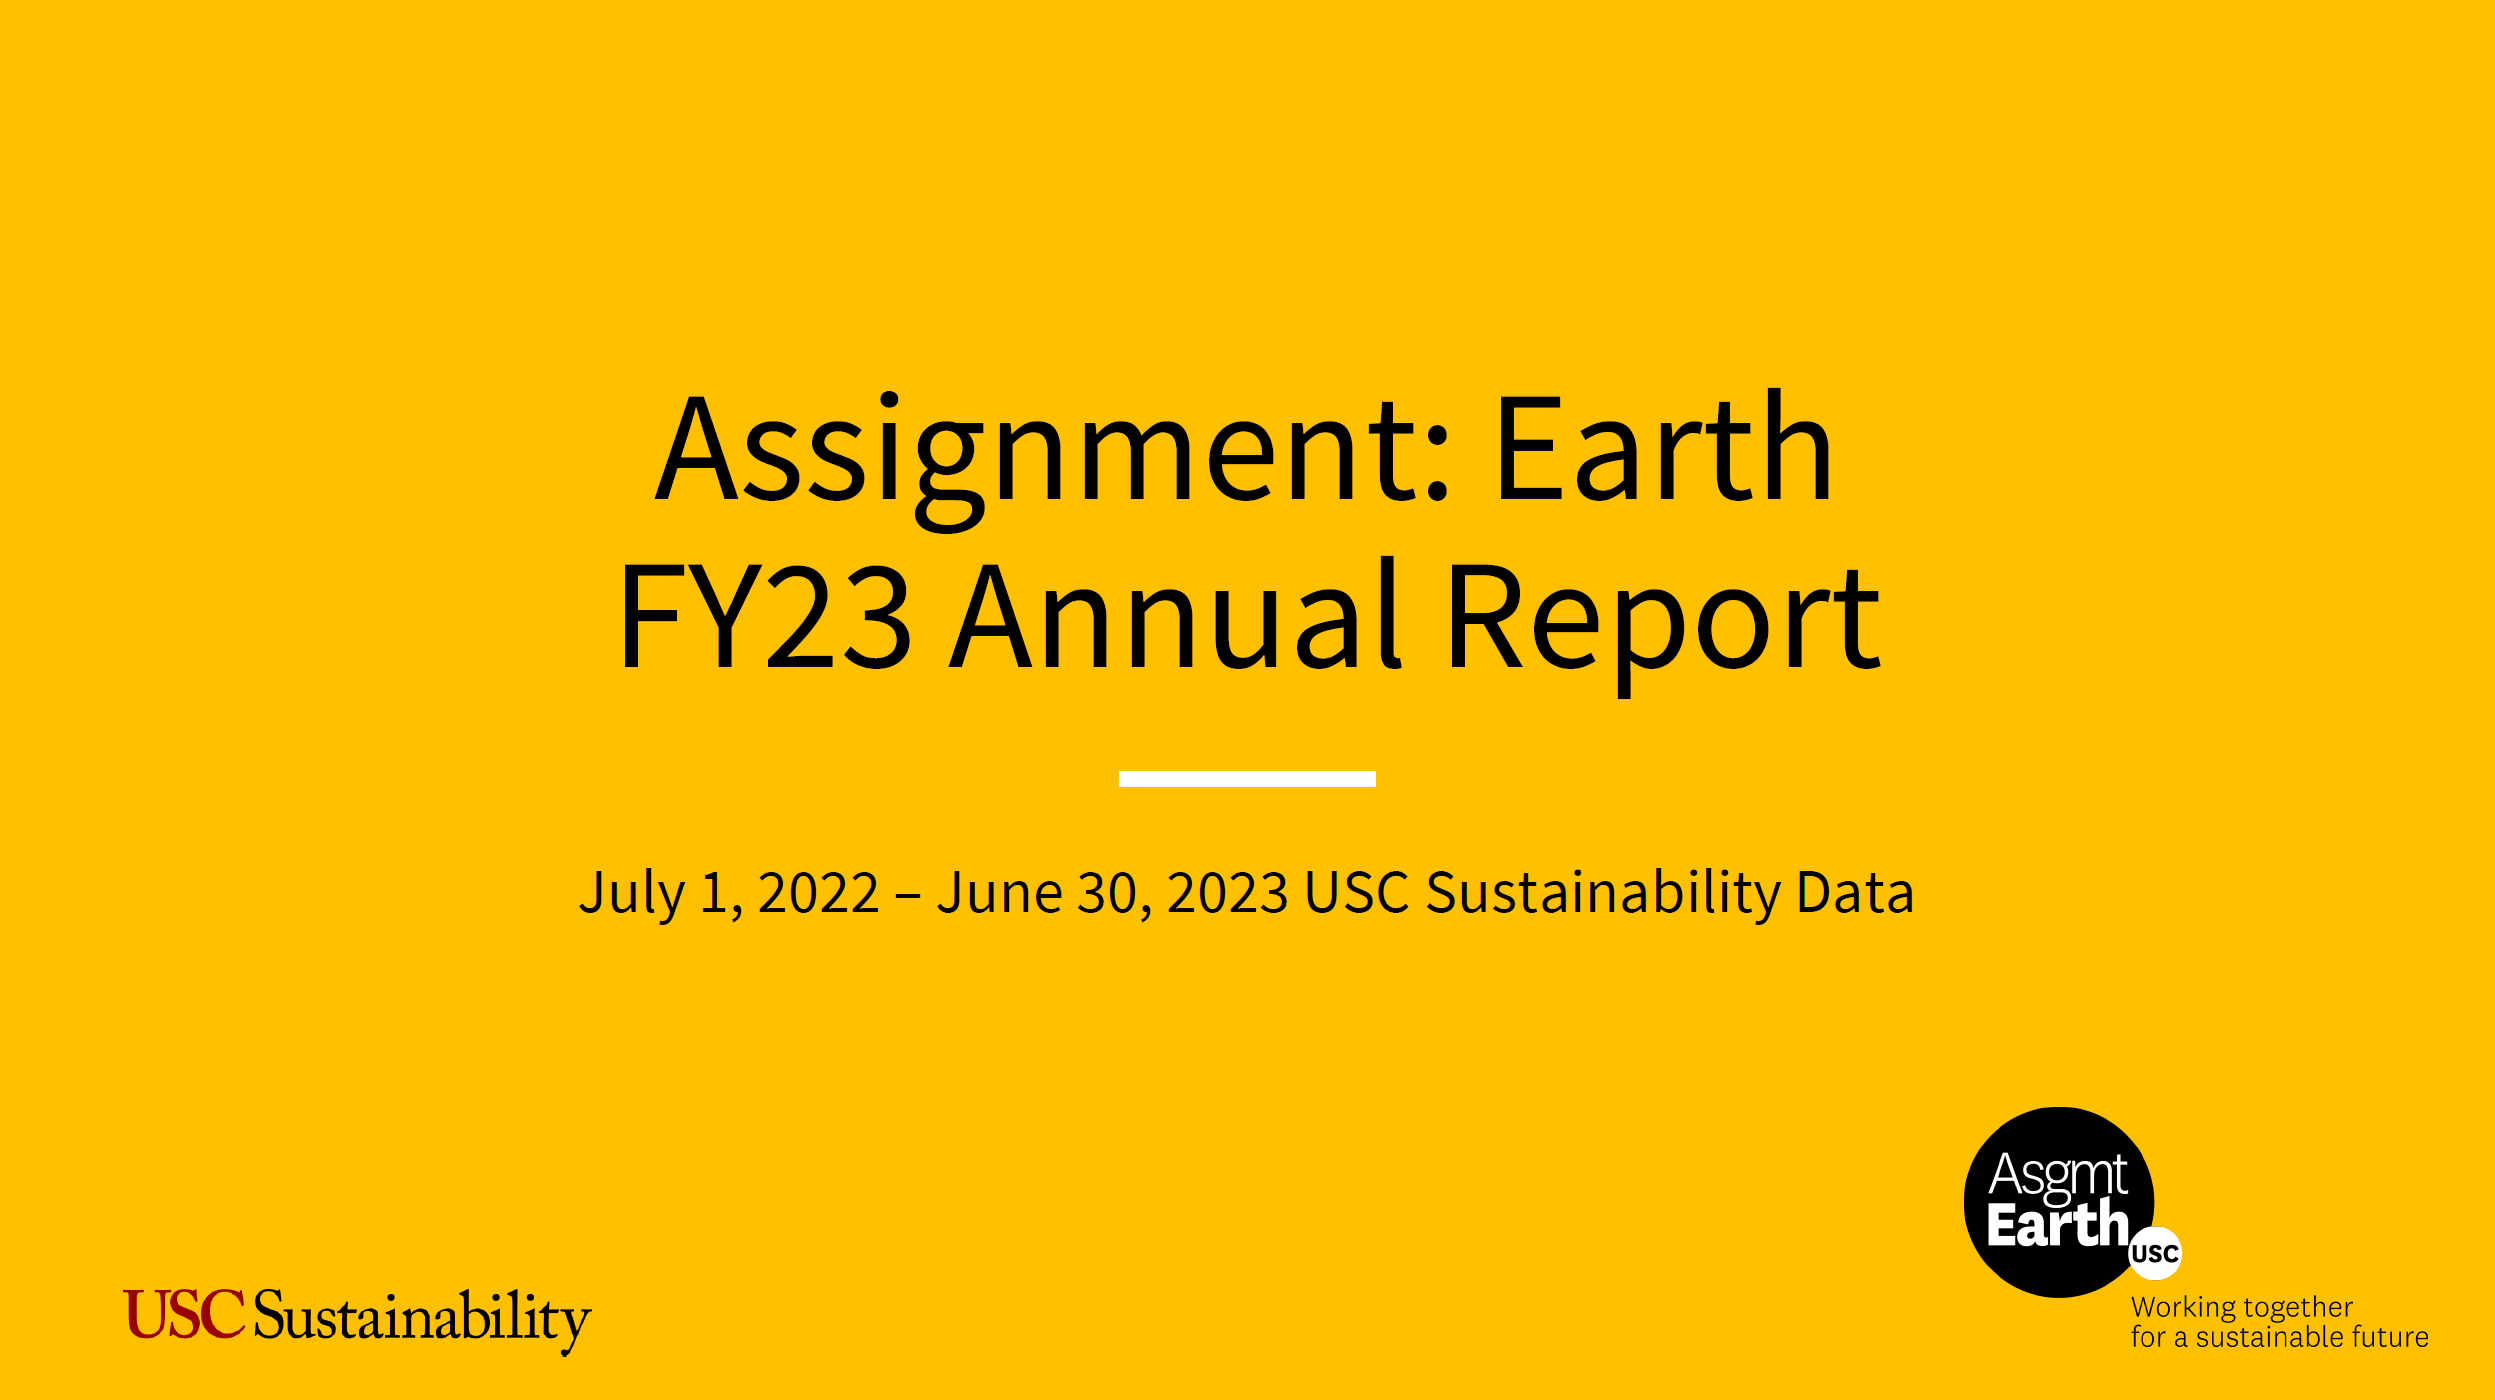 Cover page of the Assignment: Earth FY23 Annual Report.